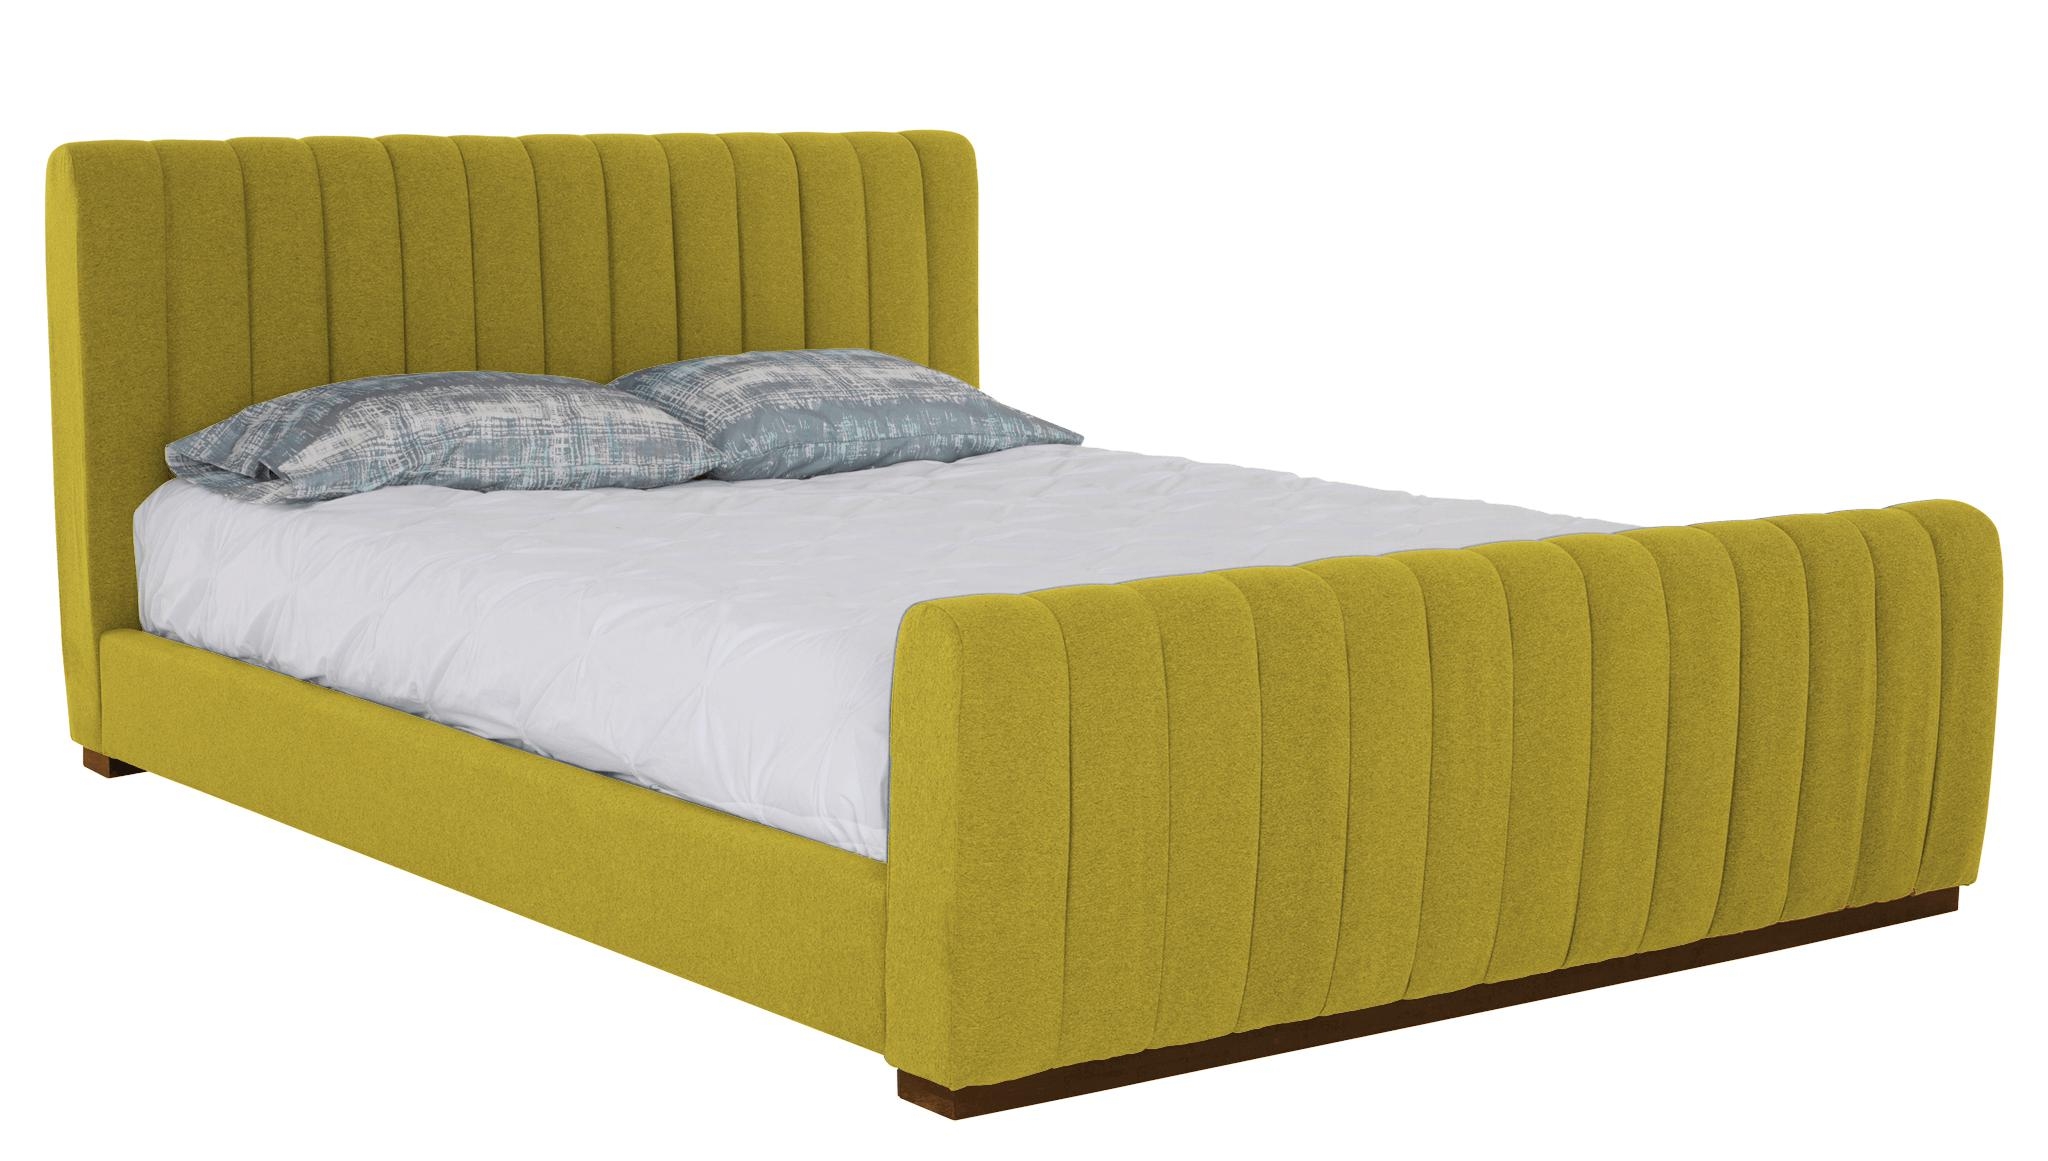 Yellow Camille Mid Century Modern Bed - Bloke Goldenrod - Mocha - Queen - Image 1